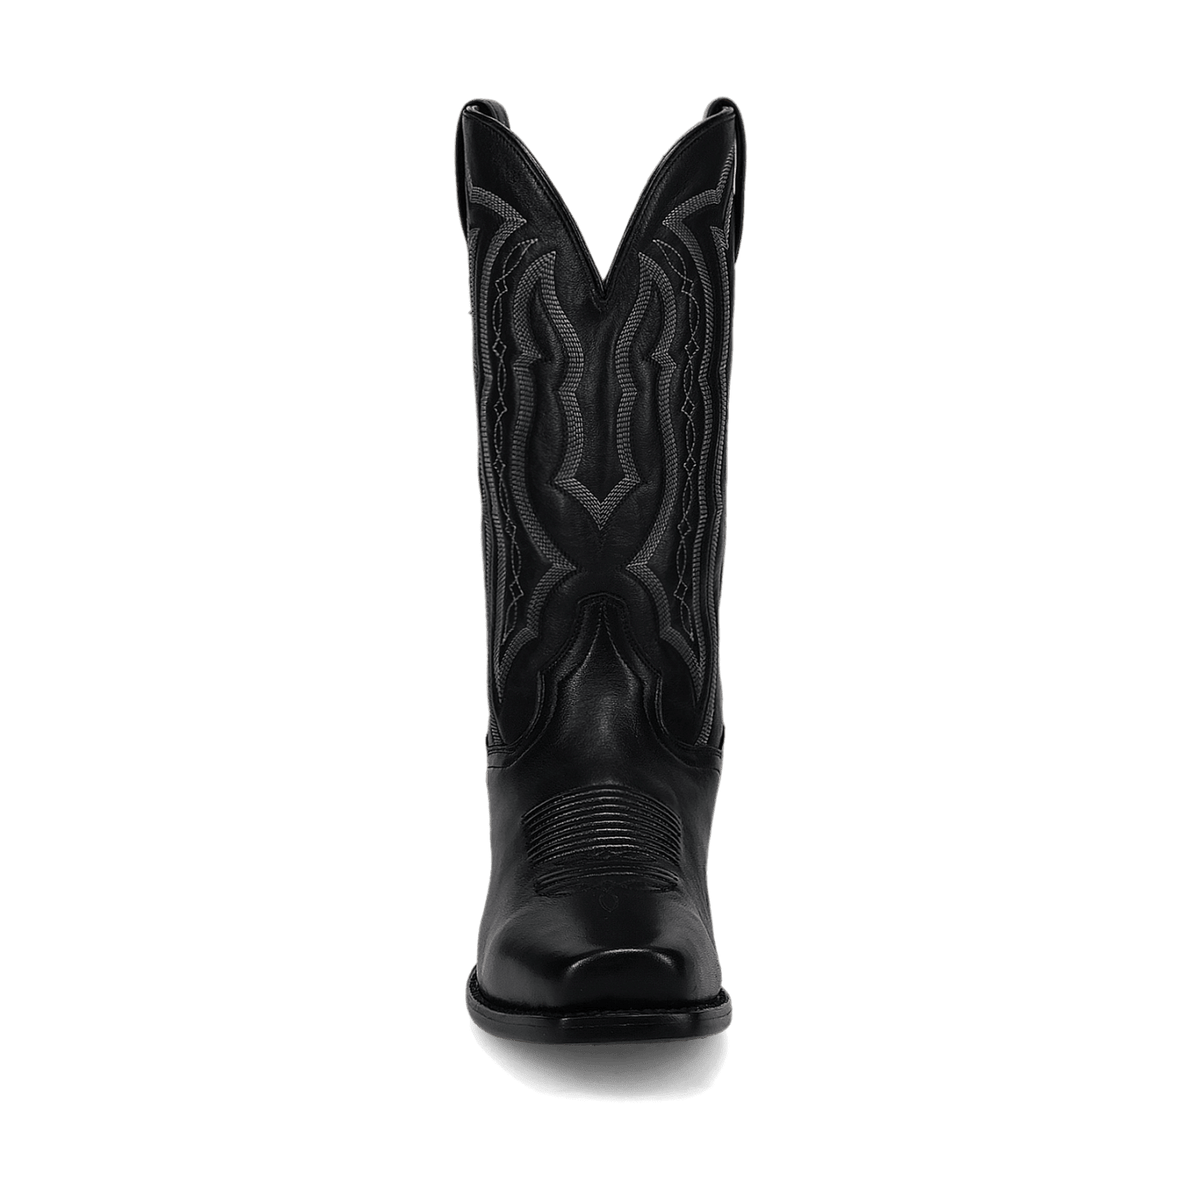 WADE LEATHER BOOT Image